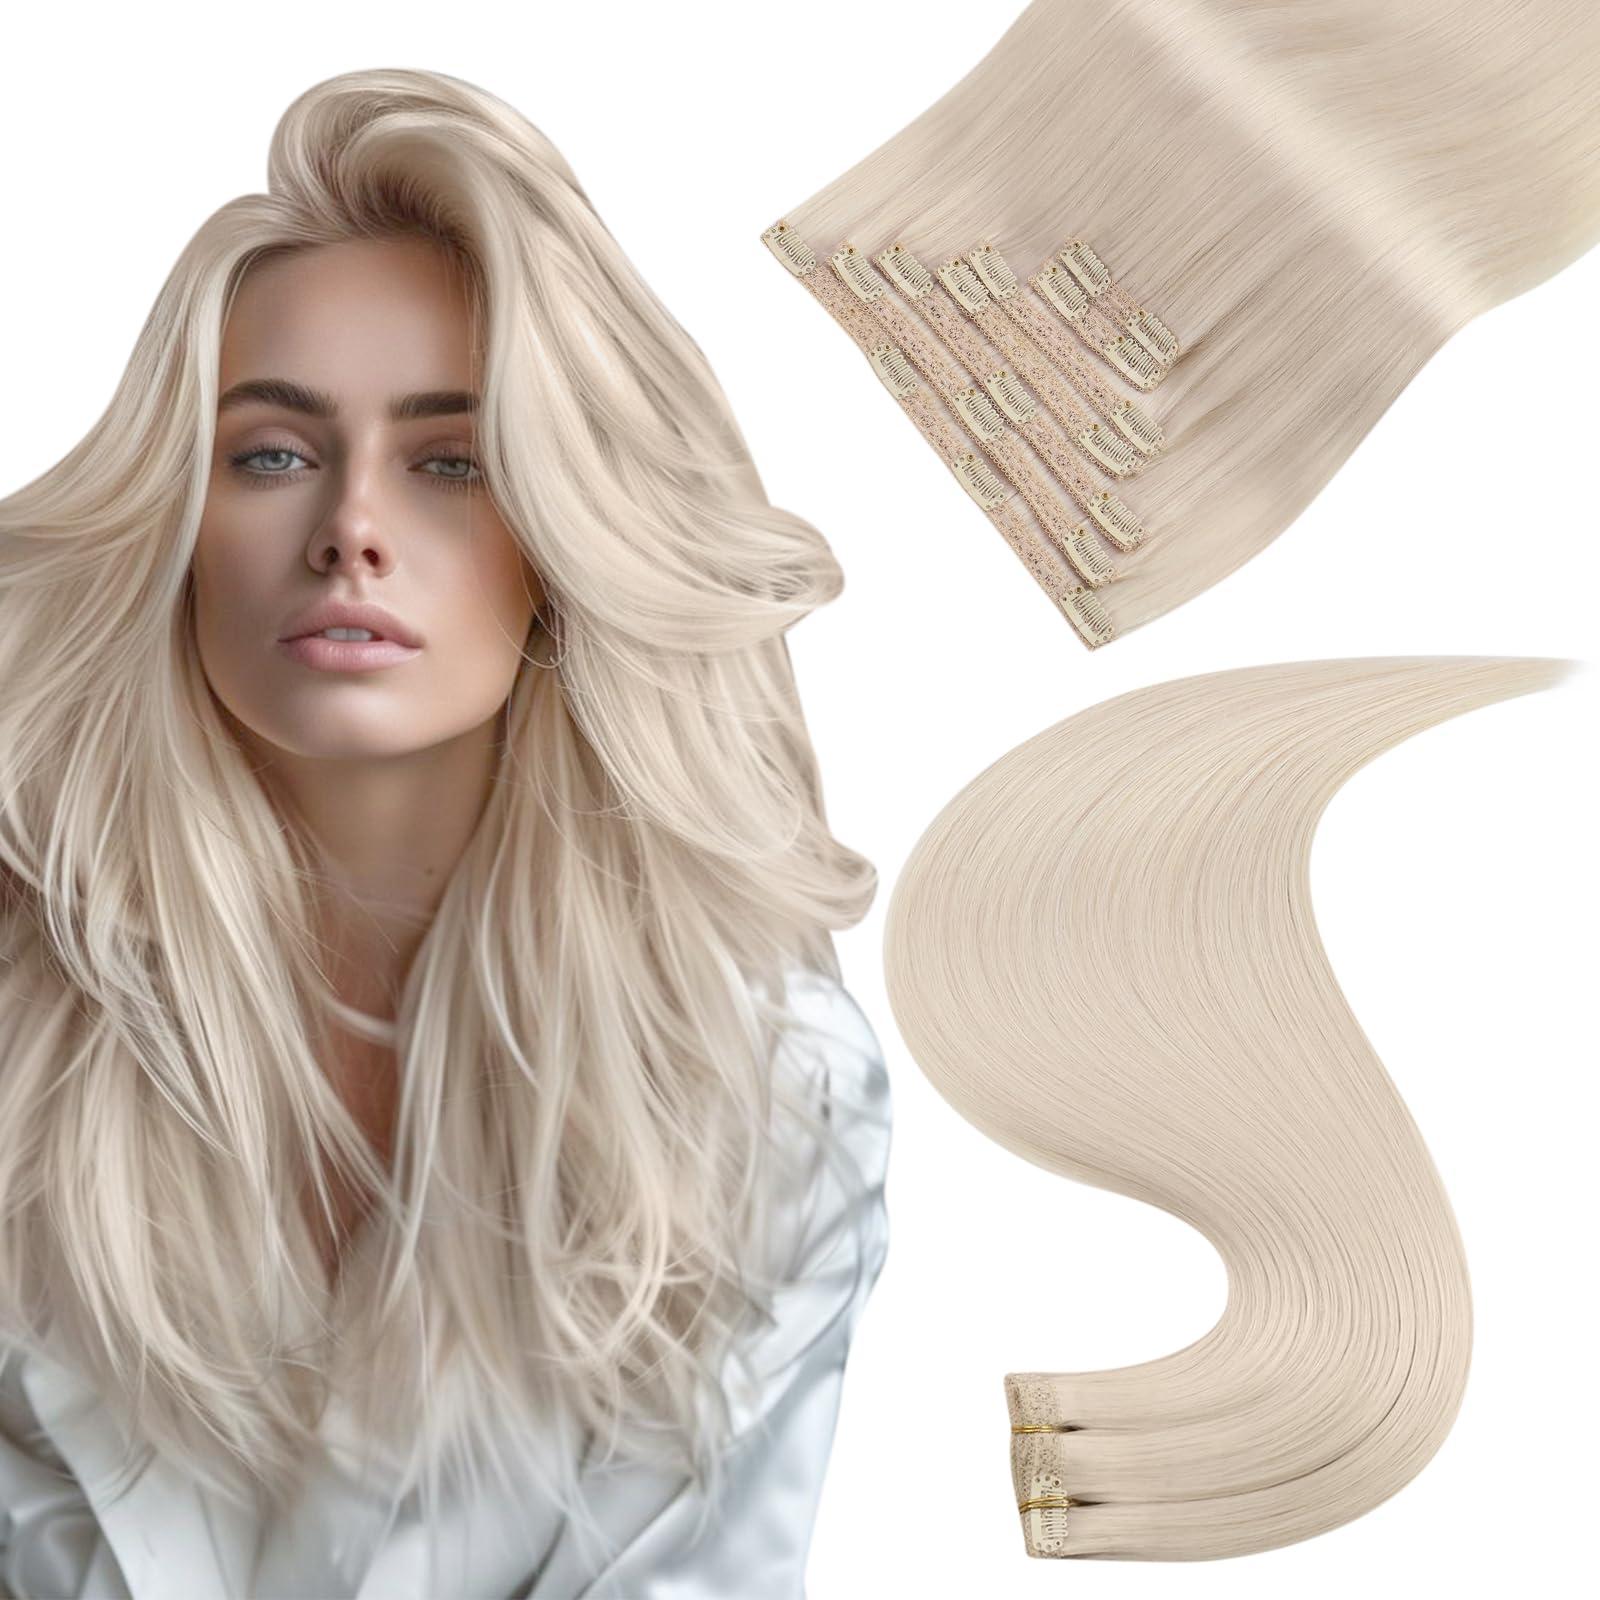 Easyouth Blonde Clip in Extensions Human Hair 14 Inch 70g 7Pcs Double Weft Clip in Hair Extensions Real Hair White Blonde Clip in Human Hair Extensions